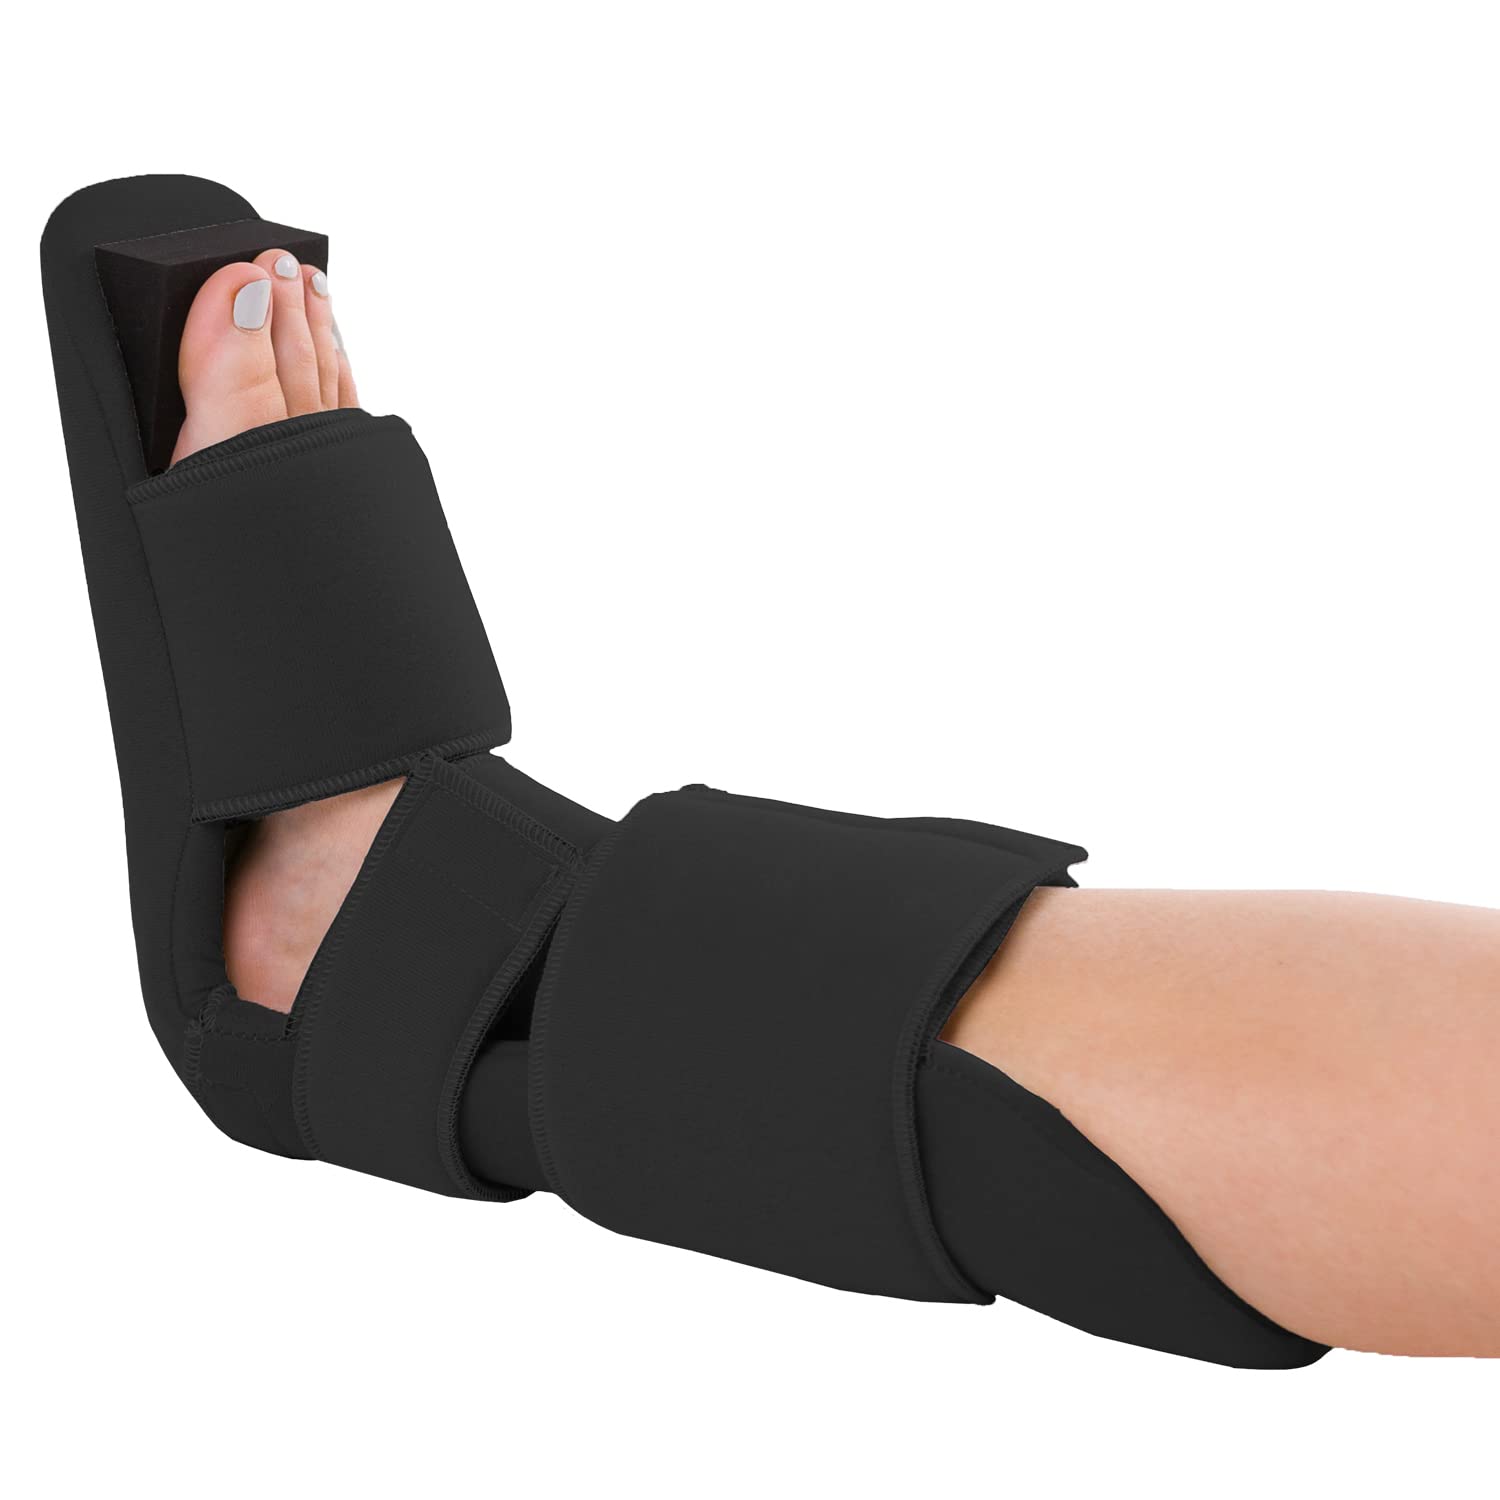 Padded 90 Degree Plantar Fasciitis Boot | Soft Night Splint to Stabilize Foot and Ankle, Stretches Plantar Fascia Ligament and Supports Achilles Tendon